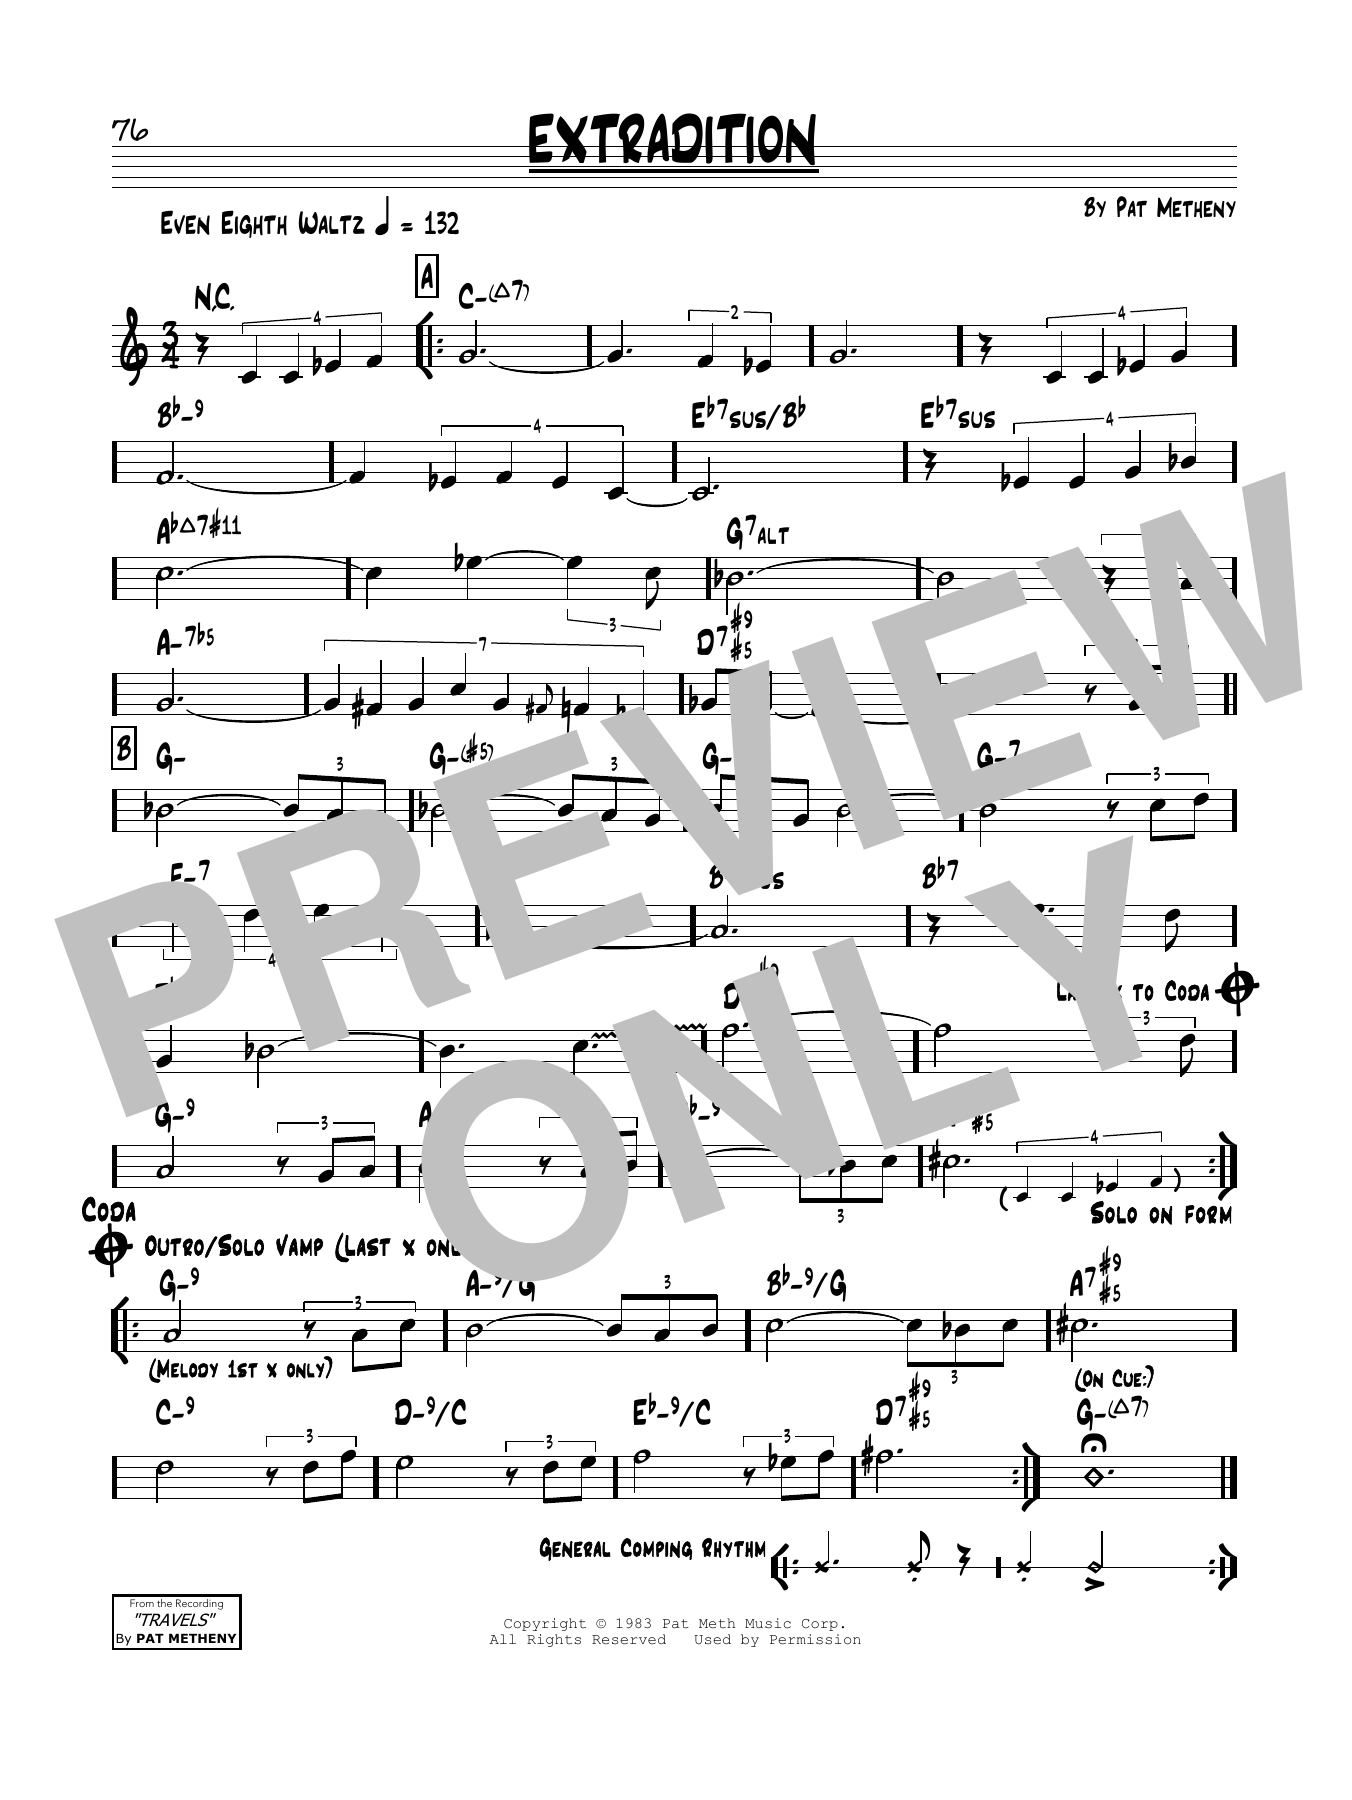 Download Pat Metheny Extradition Sheet Music